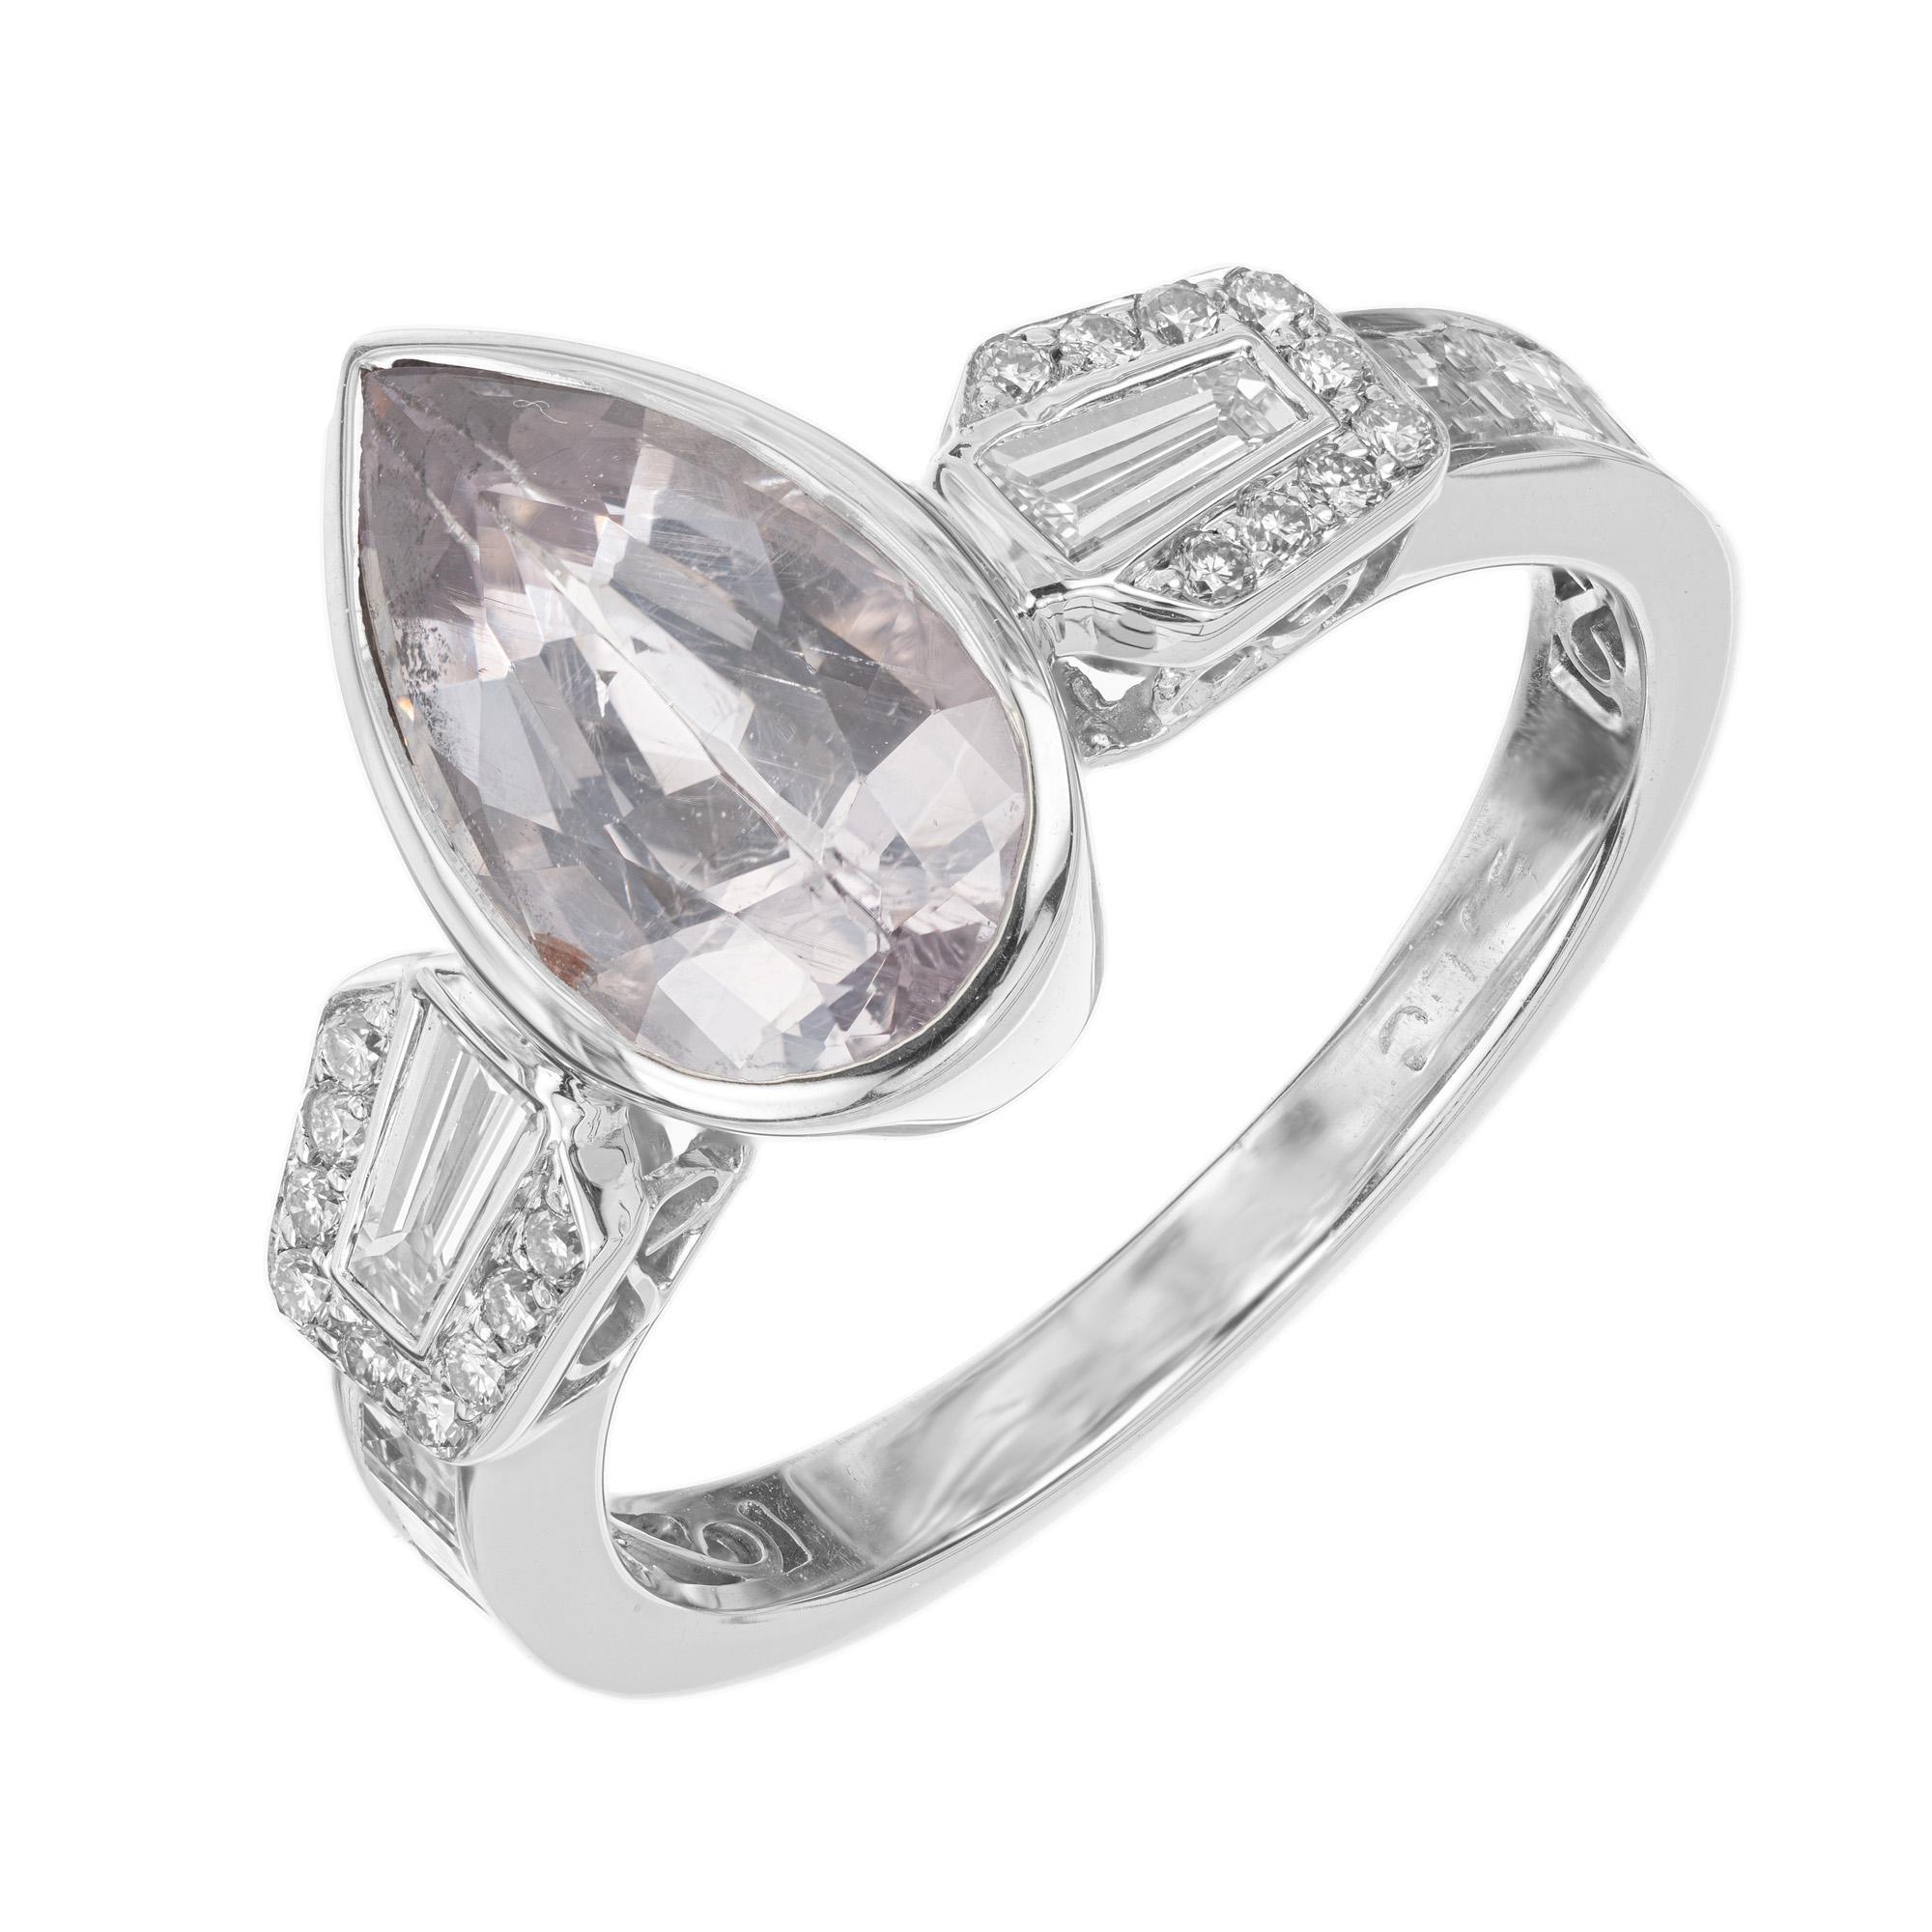 A timeless masterpiece that captures the elegance of this 2.91ct pear shaped pink sapphire. Bezel set and mounted mounted in a setting created out of 18k white gold which is accented with two tapered baguette diamonds on each side with each having a